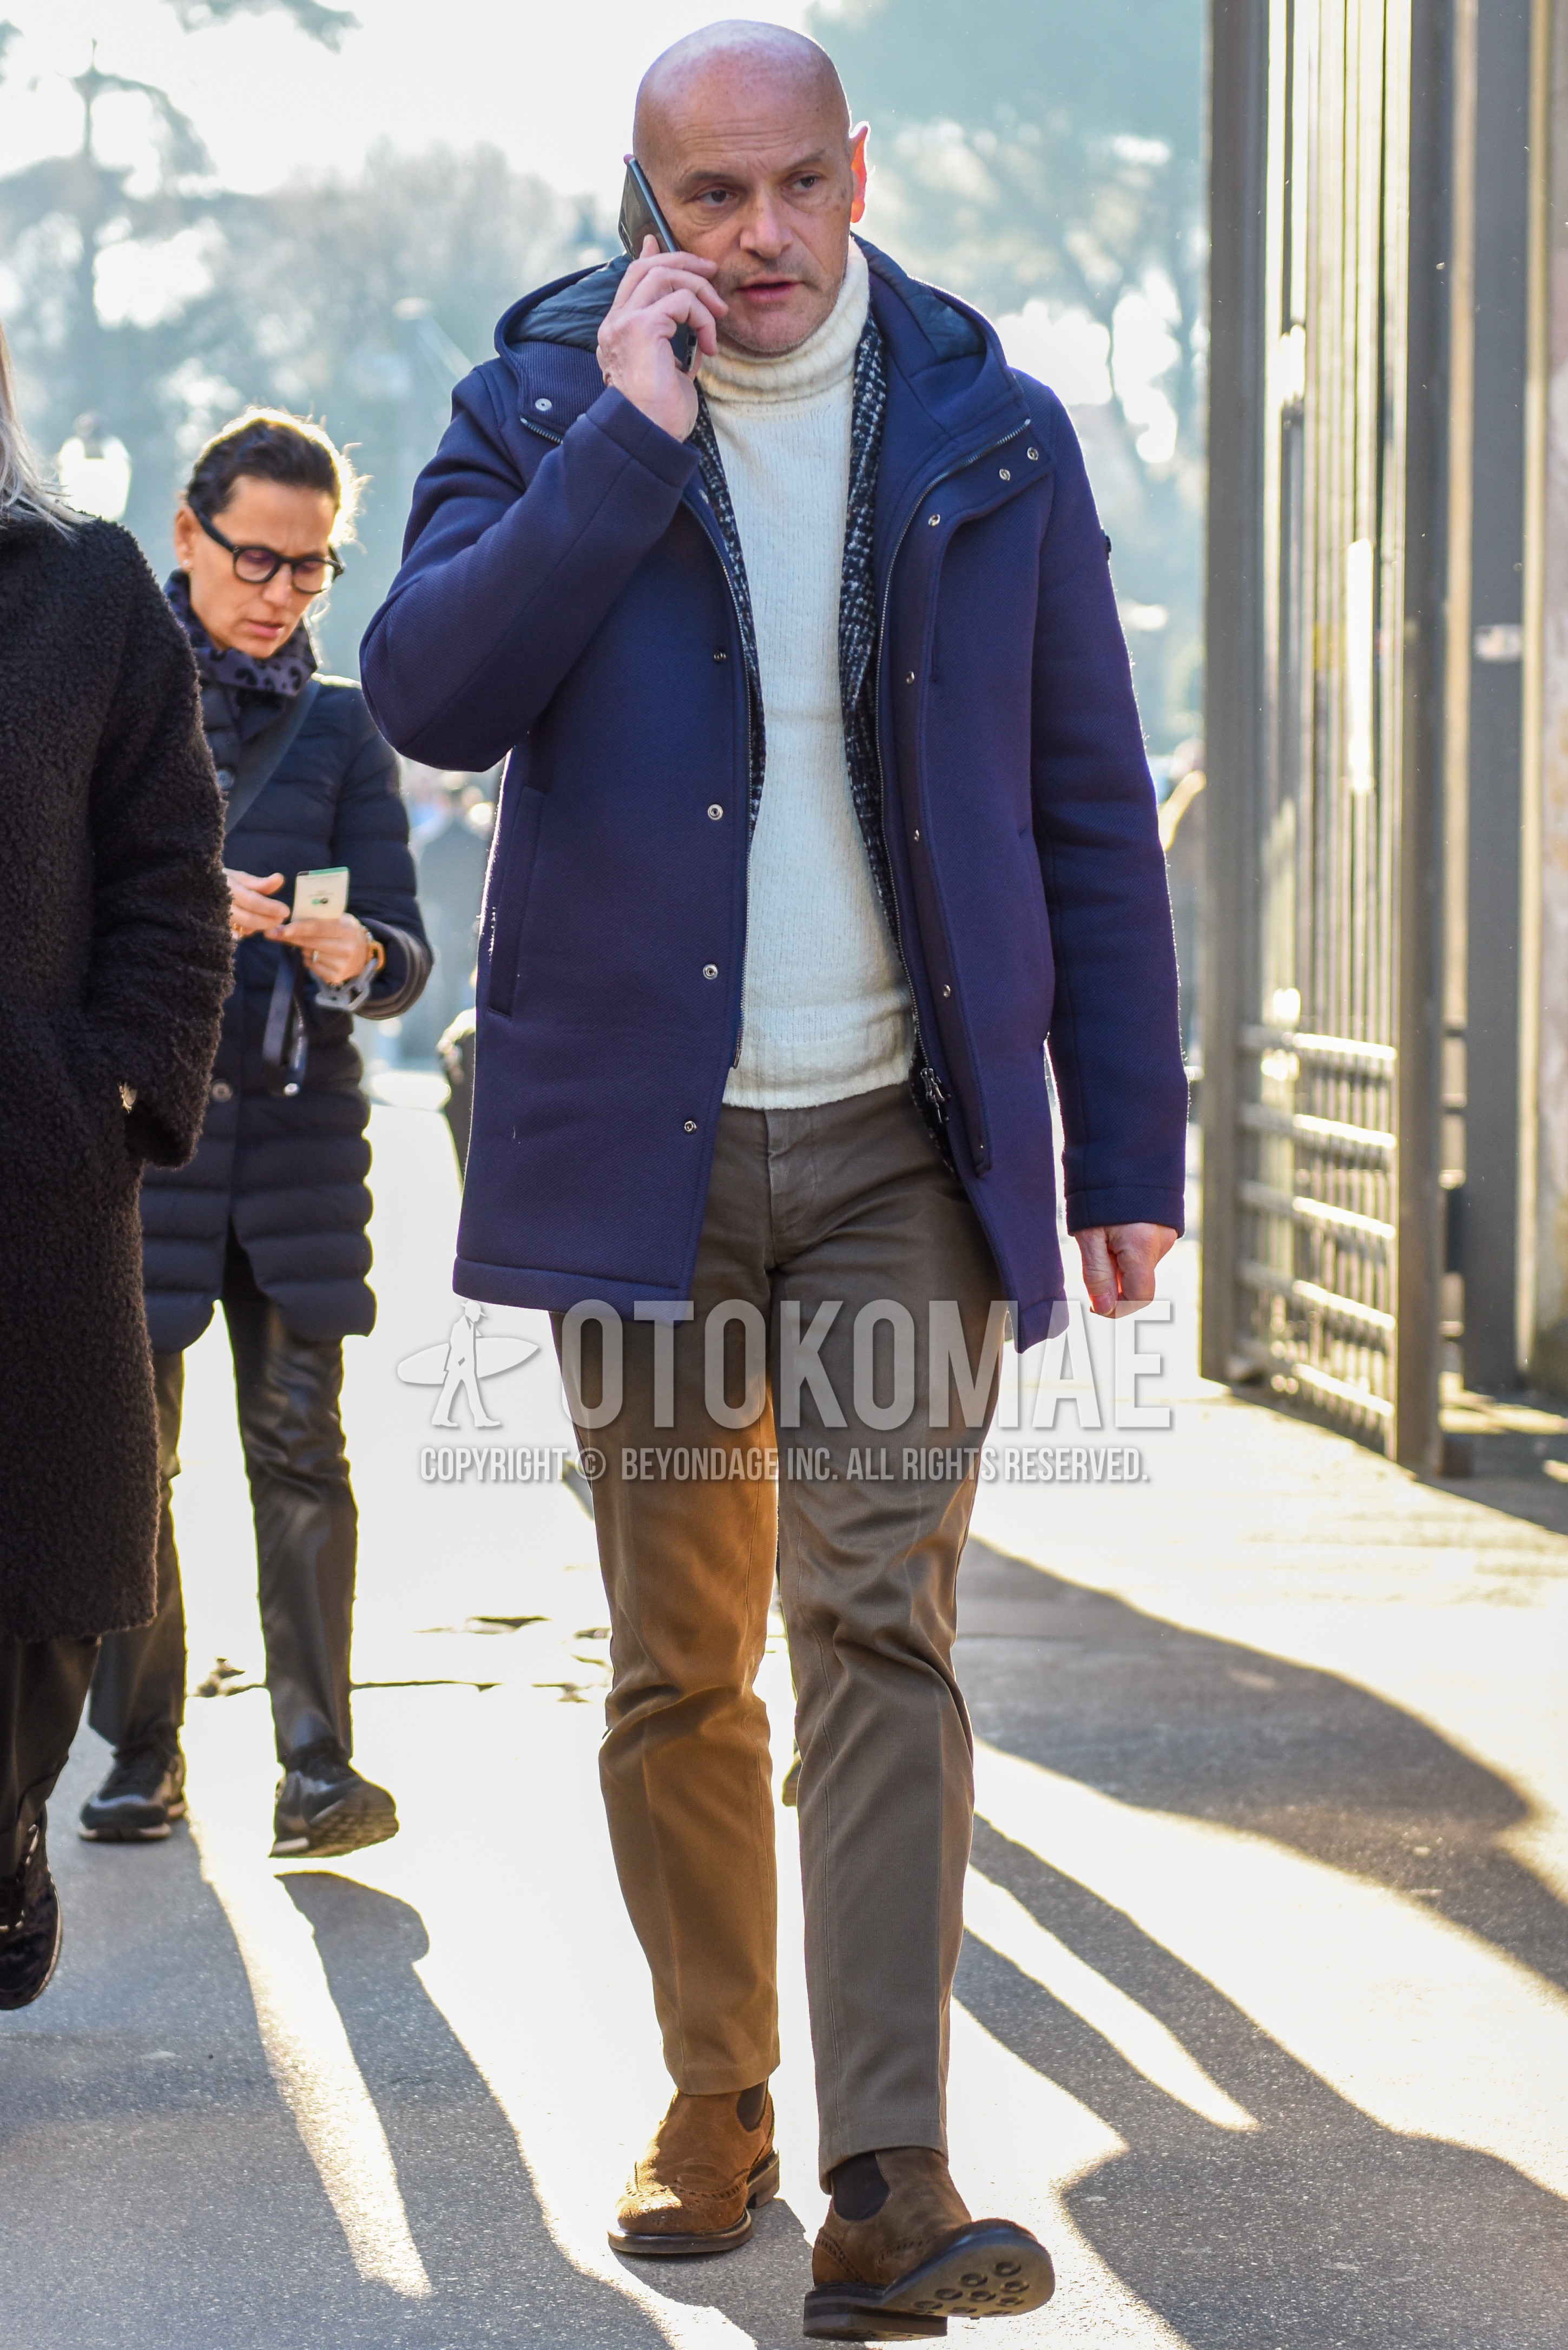 Men's autumn winter outfit with gray plain hooded coat, navy check tailored jacket, white plain turtleneck knit, beige plain chinos, beige side-gore boots.